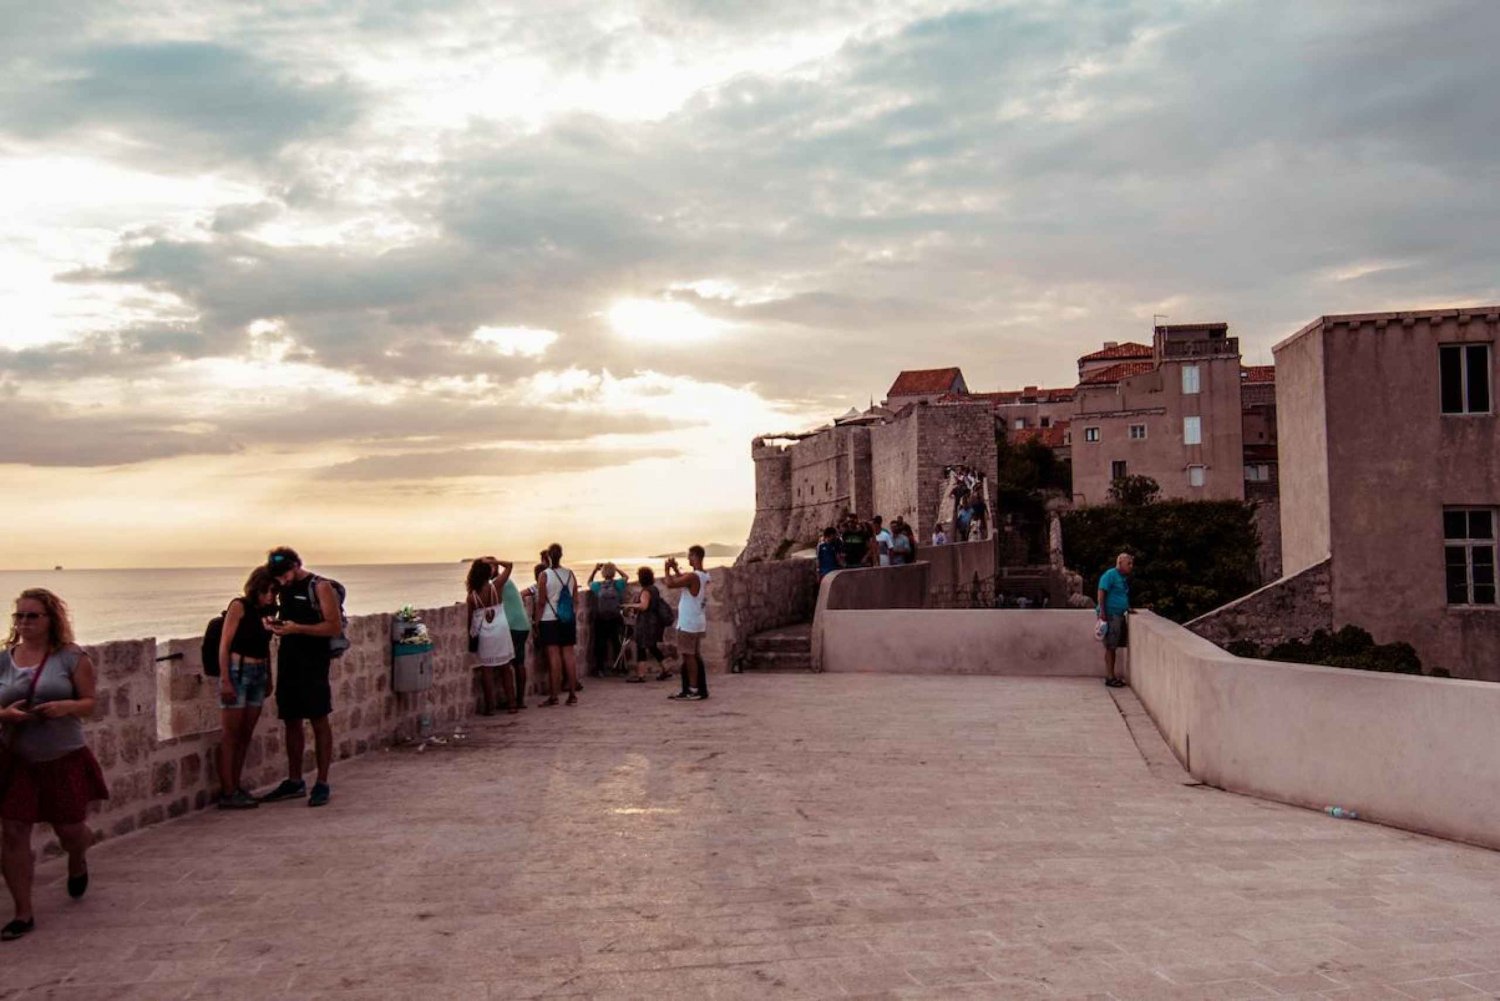 Dubrovnik: Old Town & City Walls Guided Tours Combo